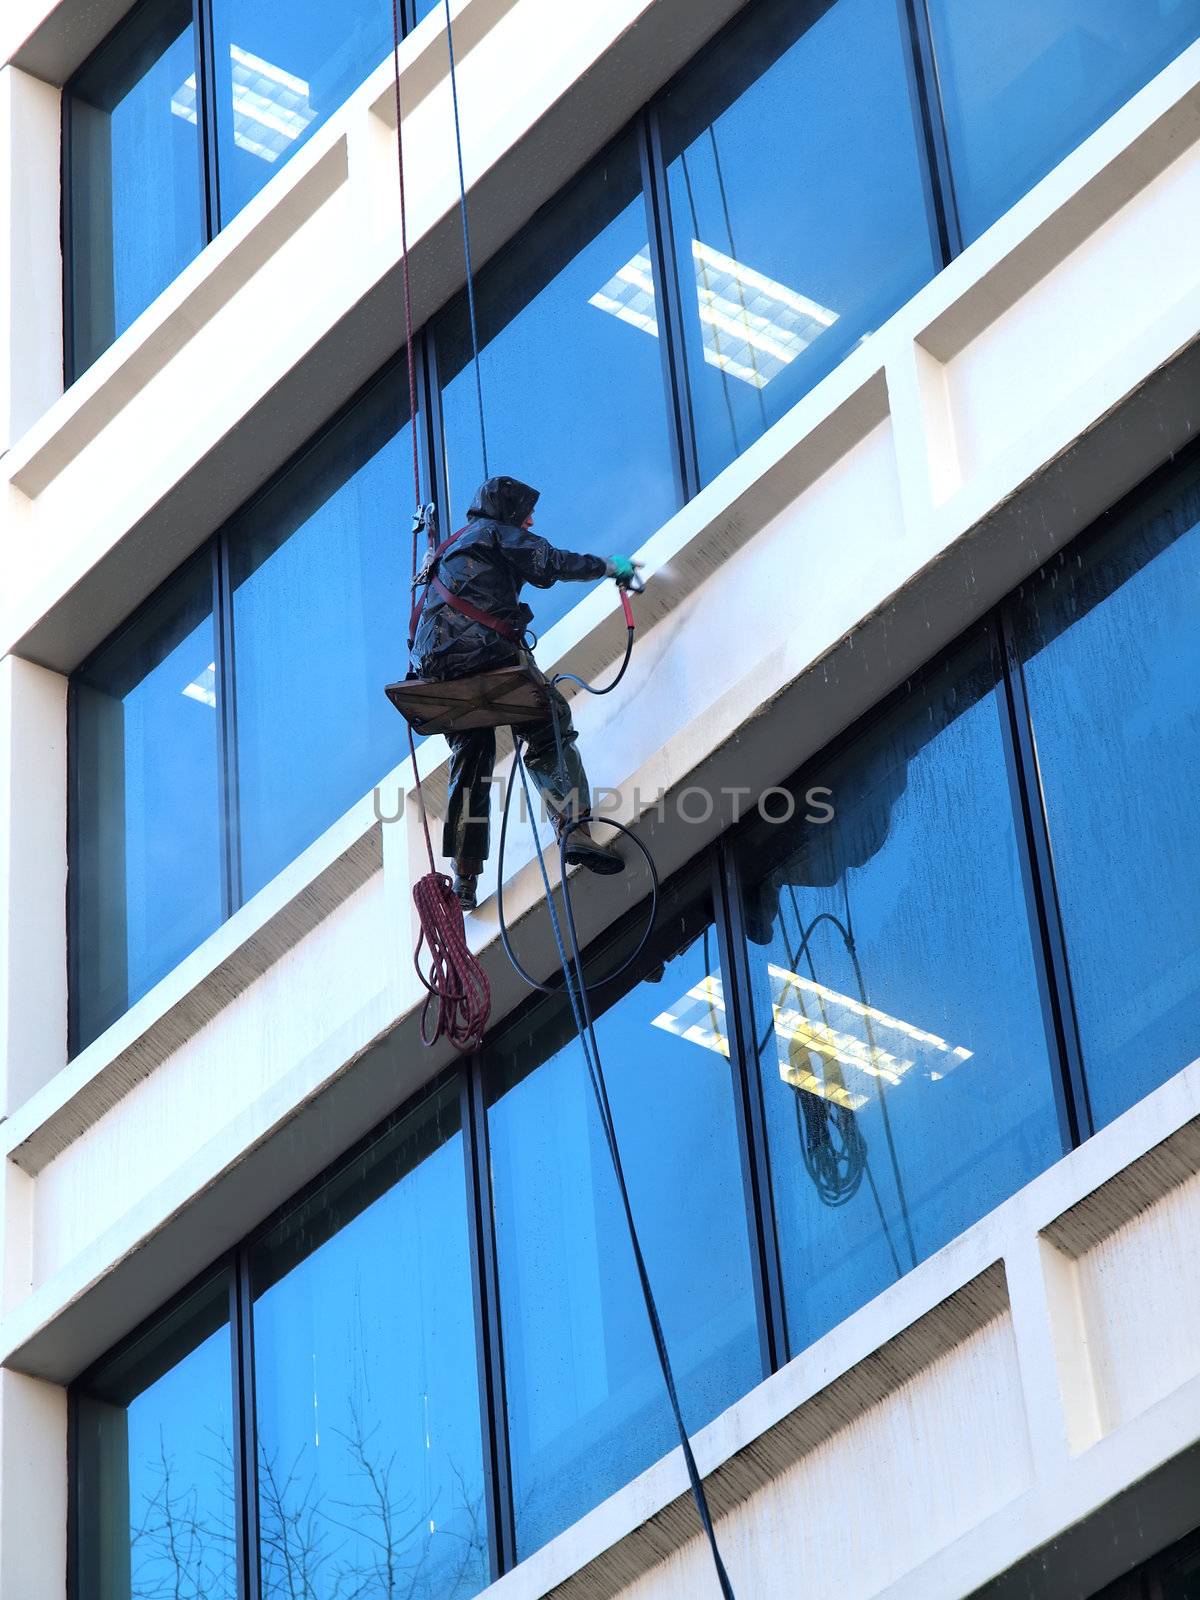 A man hanging by the ropes pressure washing an office building in downtown Portland OR.